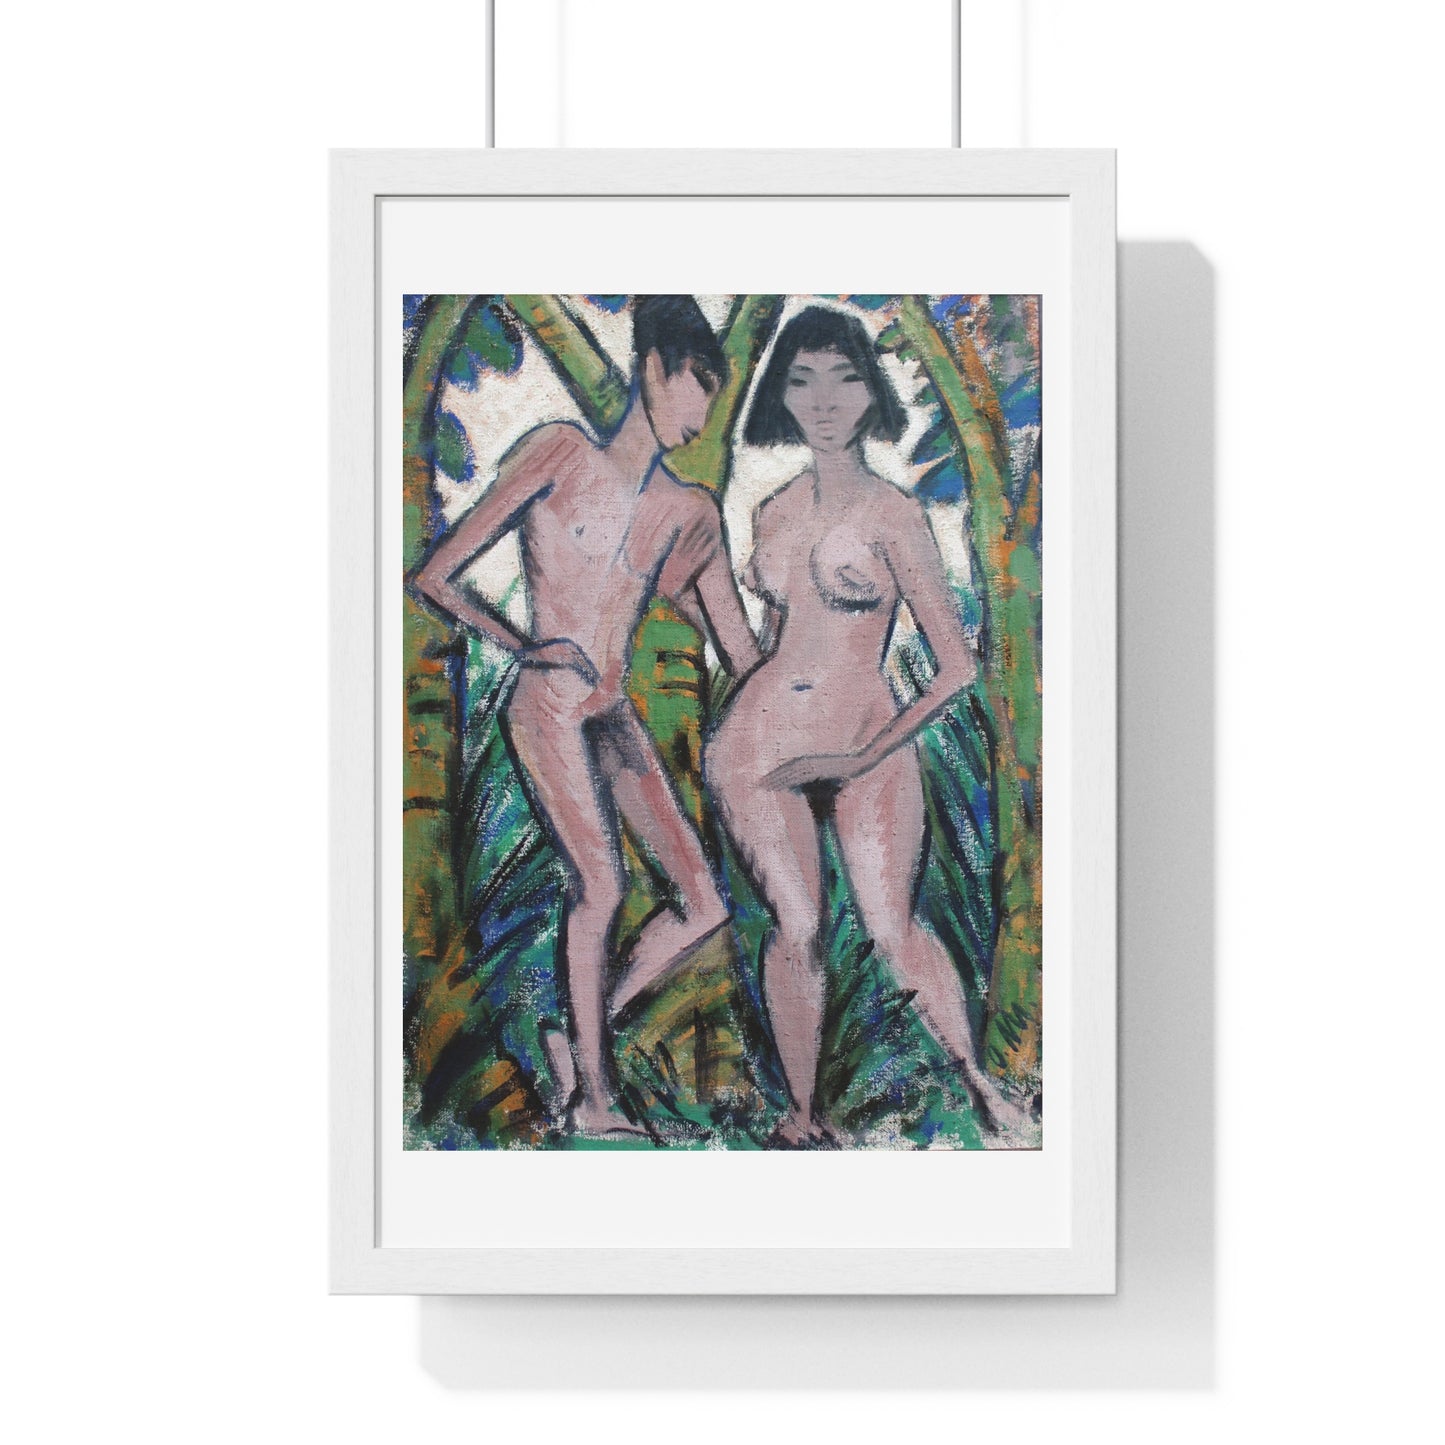 Adam and Eve (1913-1922) Modern Art Painting by Otto Mueller, from the Original, Framed Print